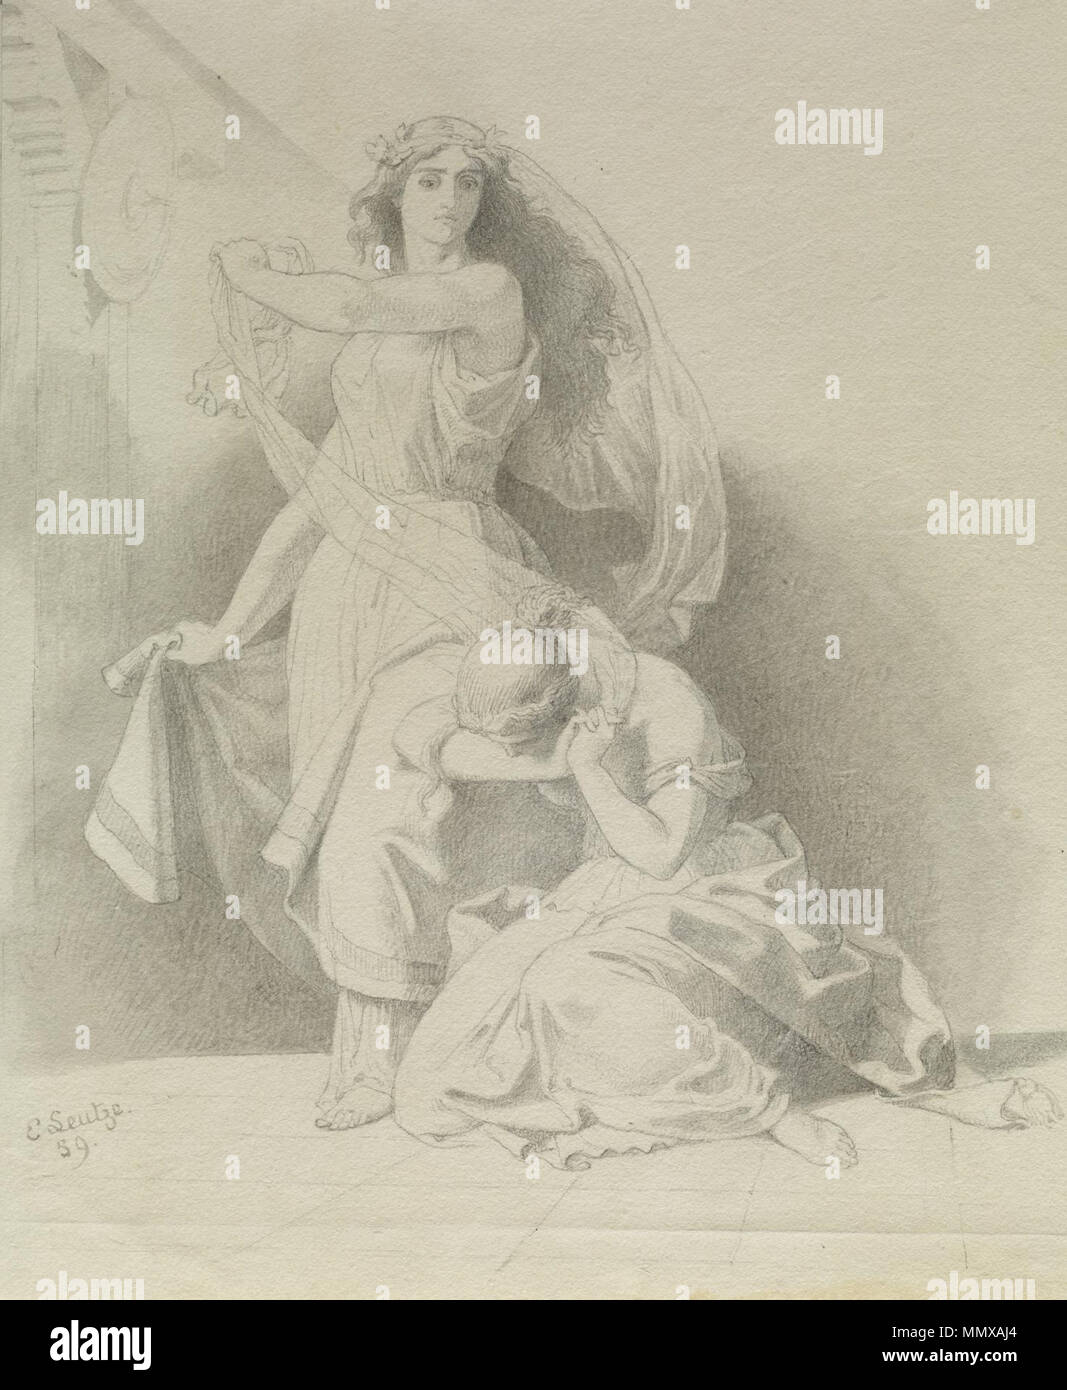 37.1266 Emanuel Leutze. 'Woman Weeping At Feet Of Woman,' 1859. Pencil on paper. Walters Art Museum (37.1266): Acquired by William T. Walters. Emanuel Leutze - Woman Weeping at the Feet of Another - Walters 371266 Stock Photo